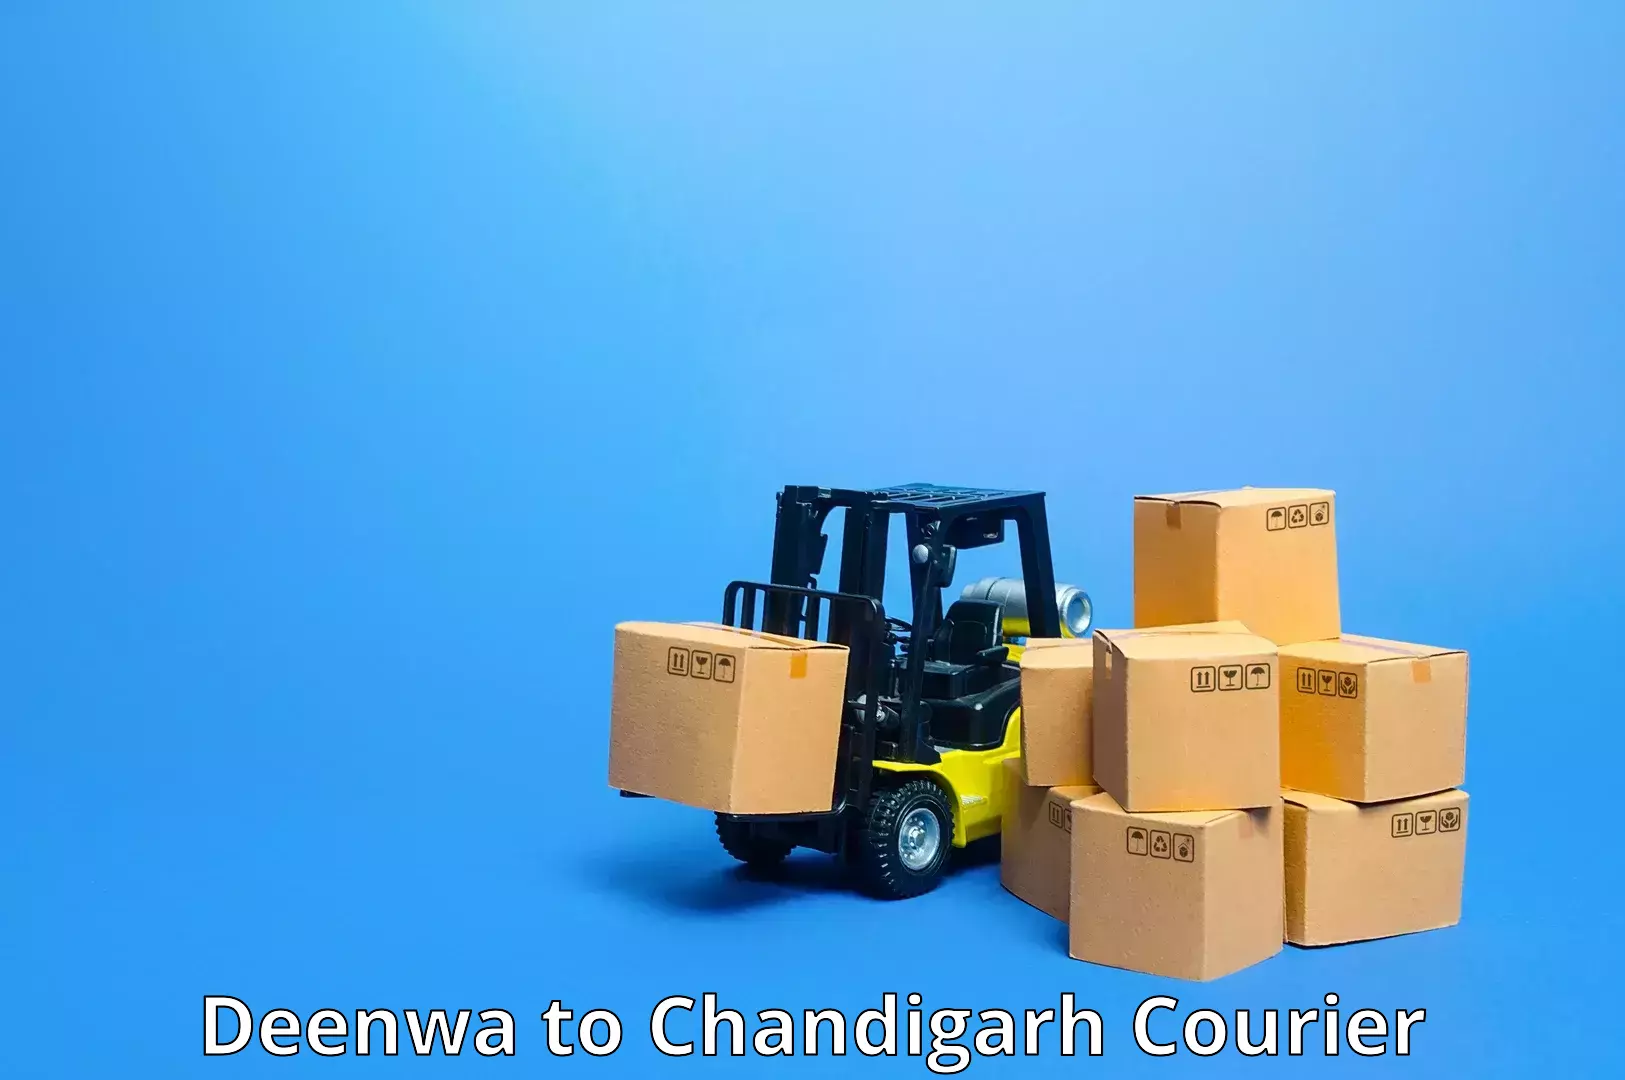 Courier service innovation Deenwa to Chandigarh